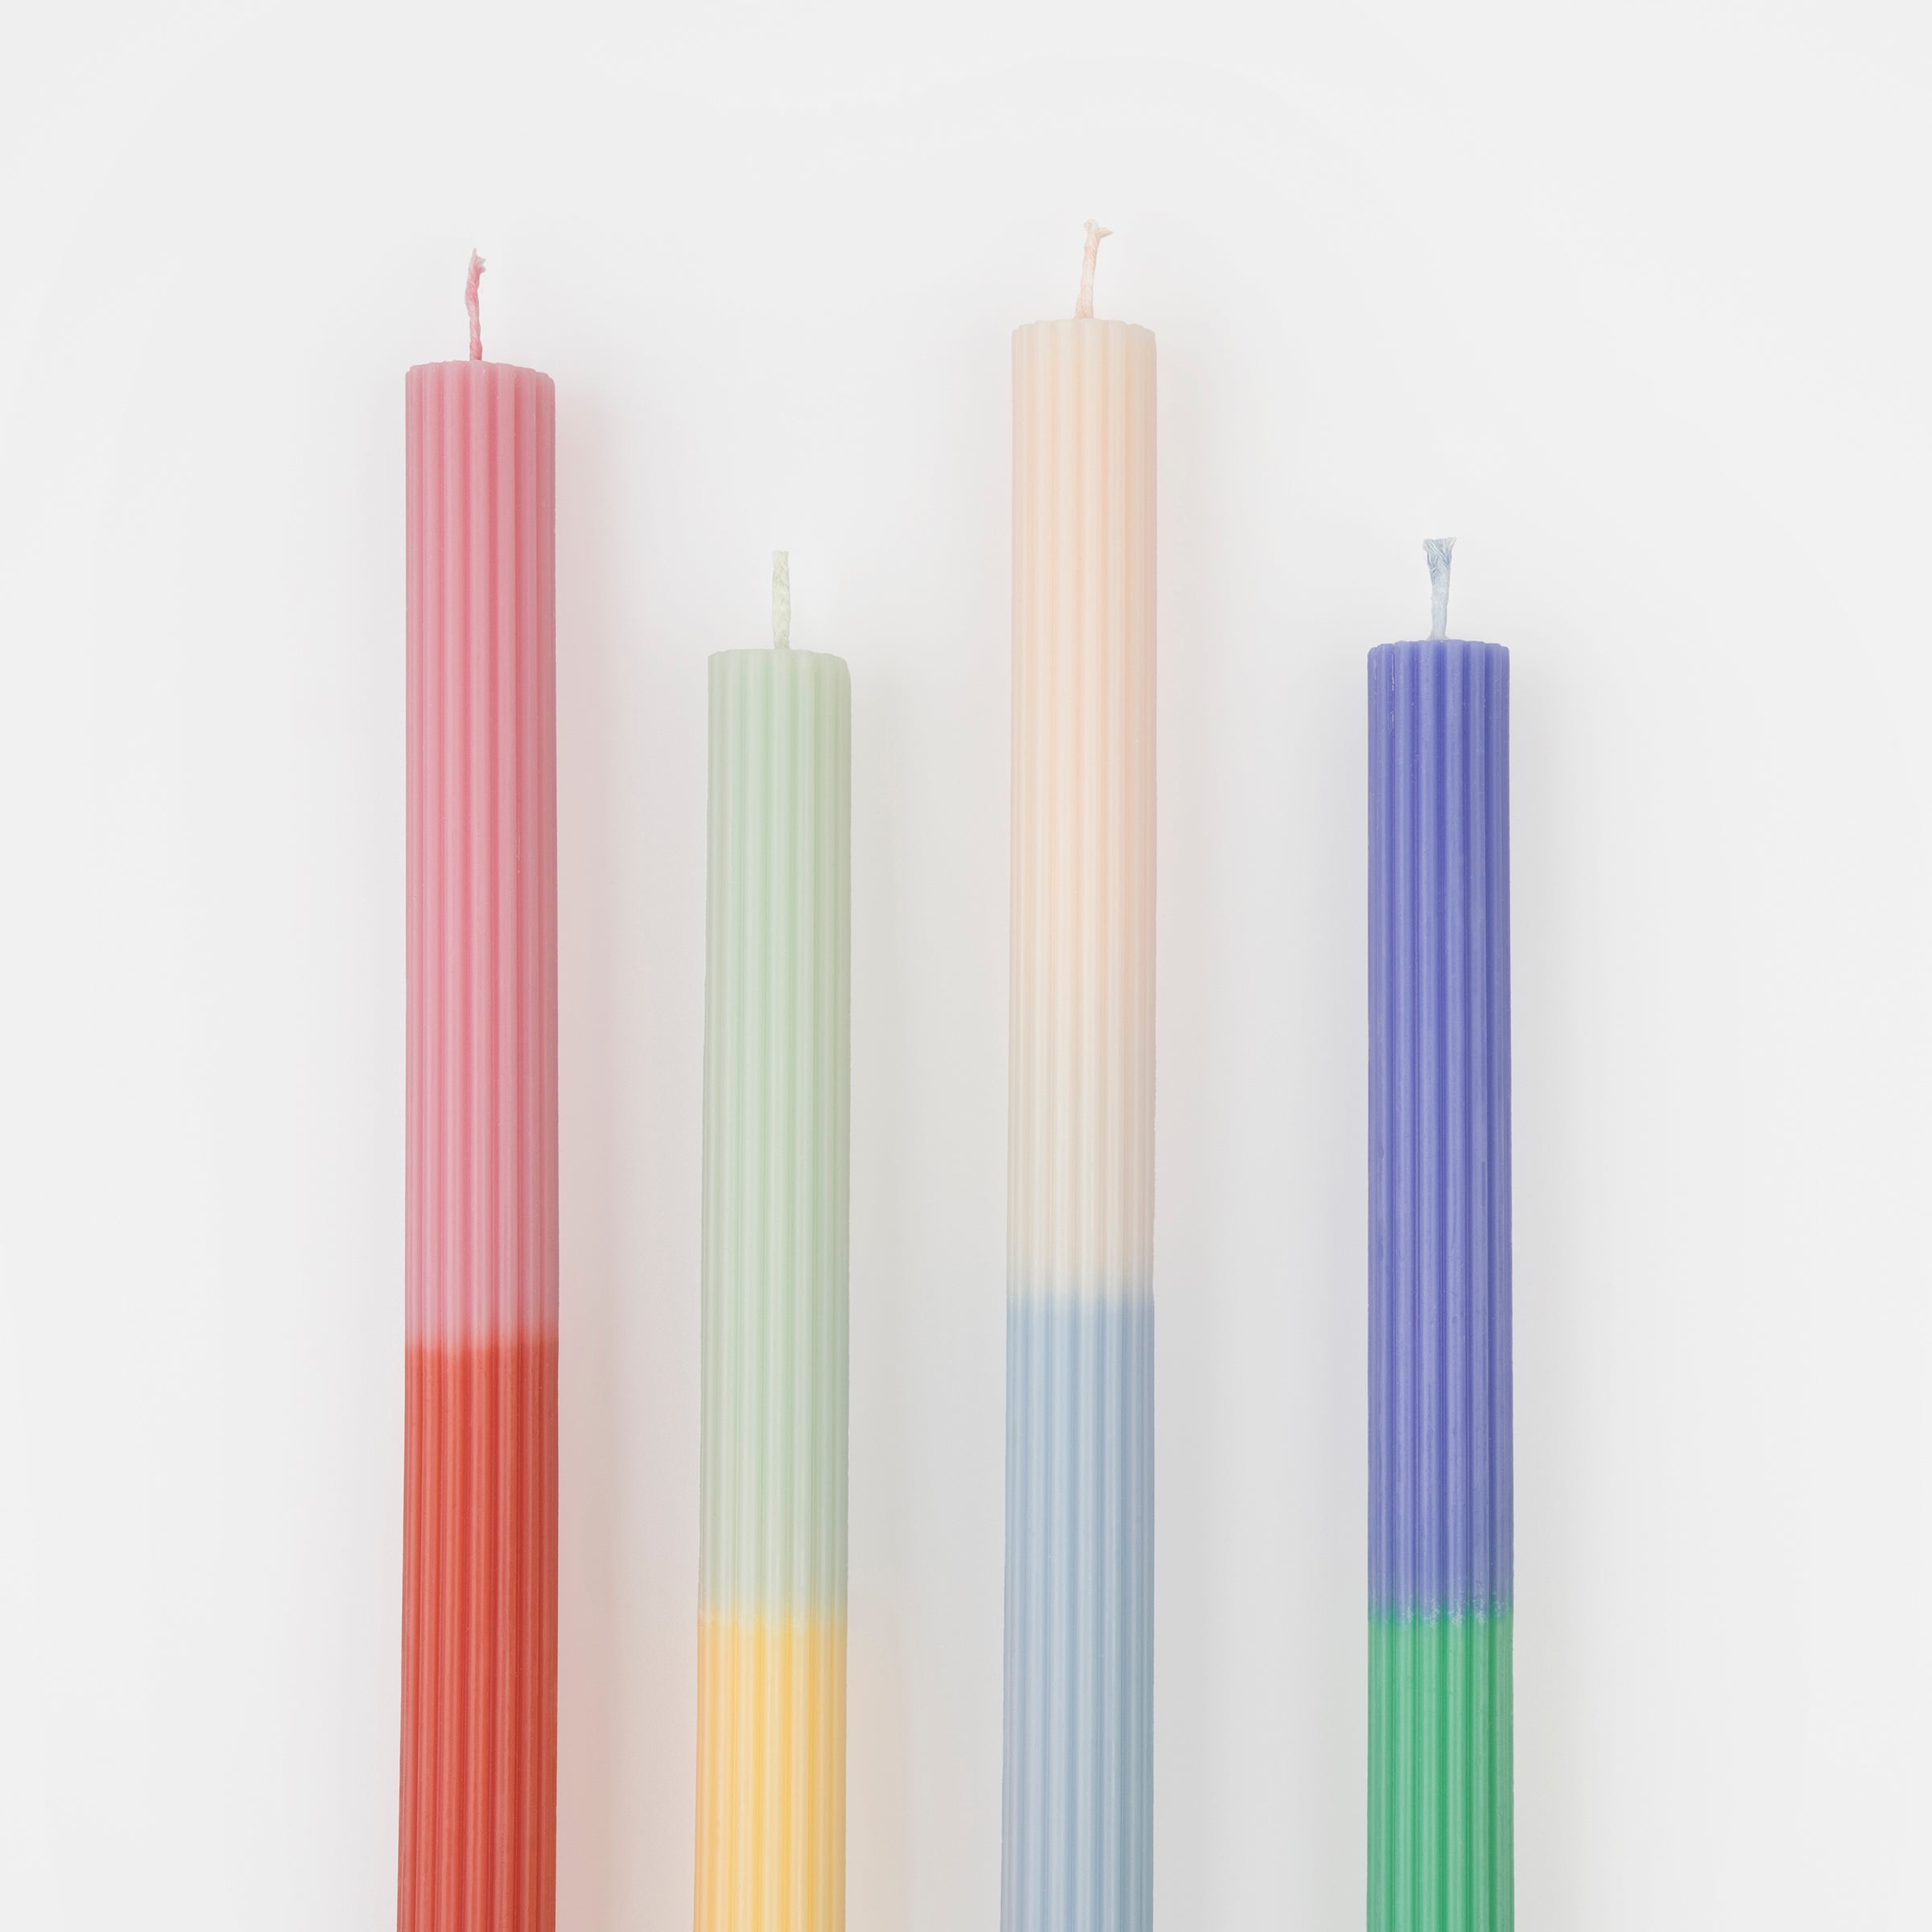 Our table candles are colorful and will look amazing as party table decorations.